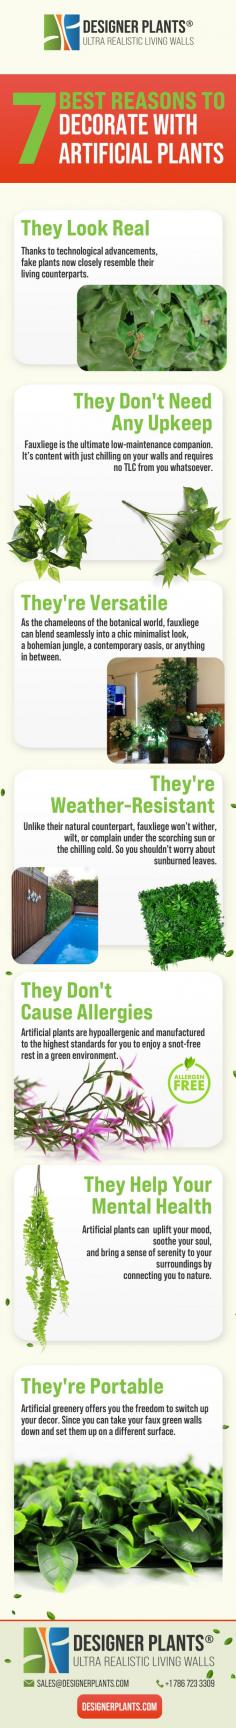 Want to know the 7 reasons to decorate with fake plants? Check out Designer Plant's infographic!